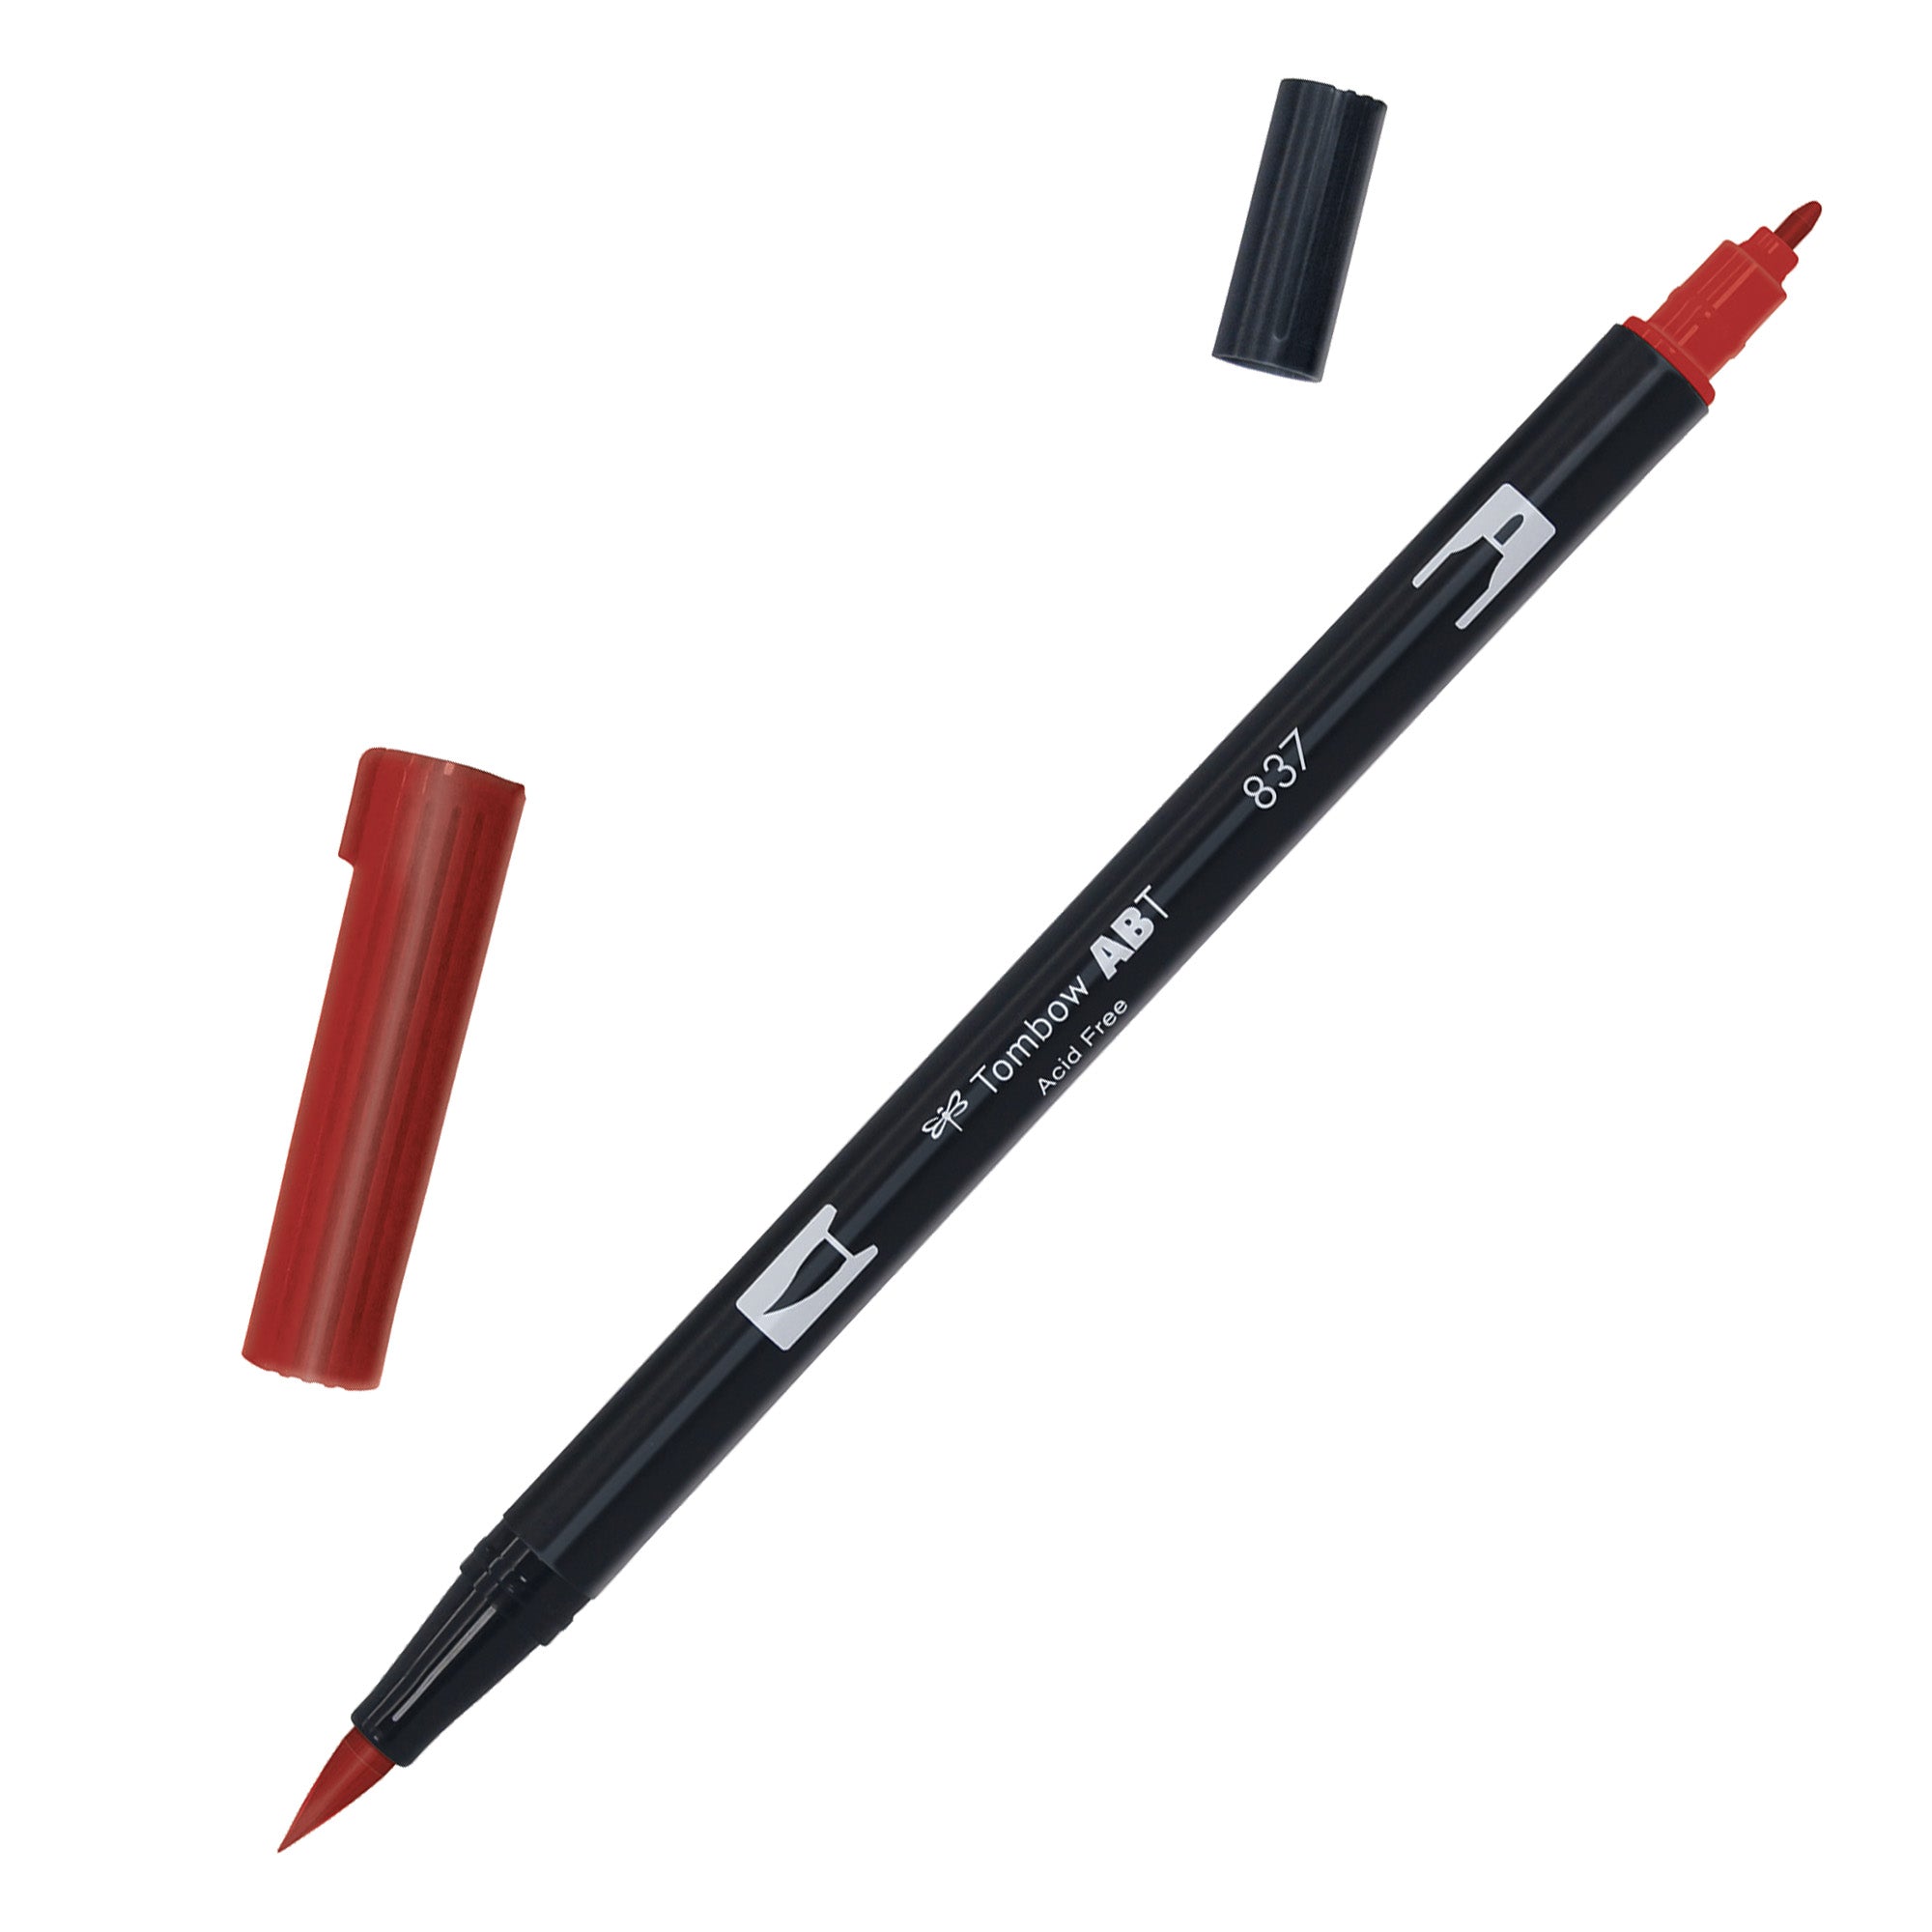 tombow-pennarello-abt-dual-brush-837-wine-red